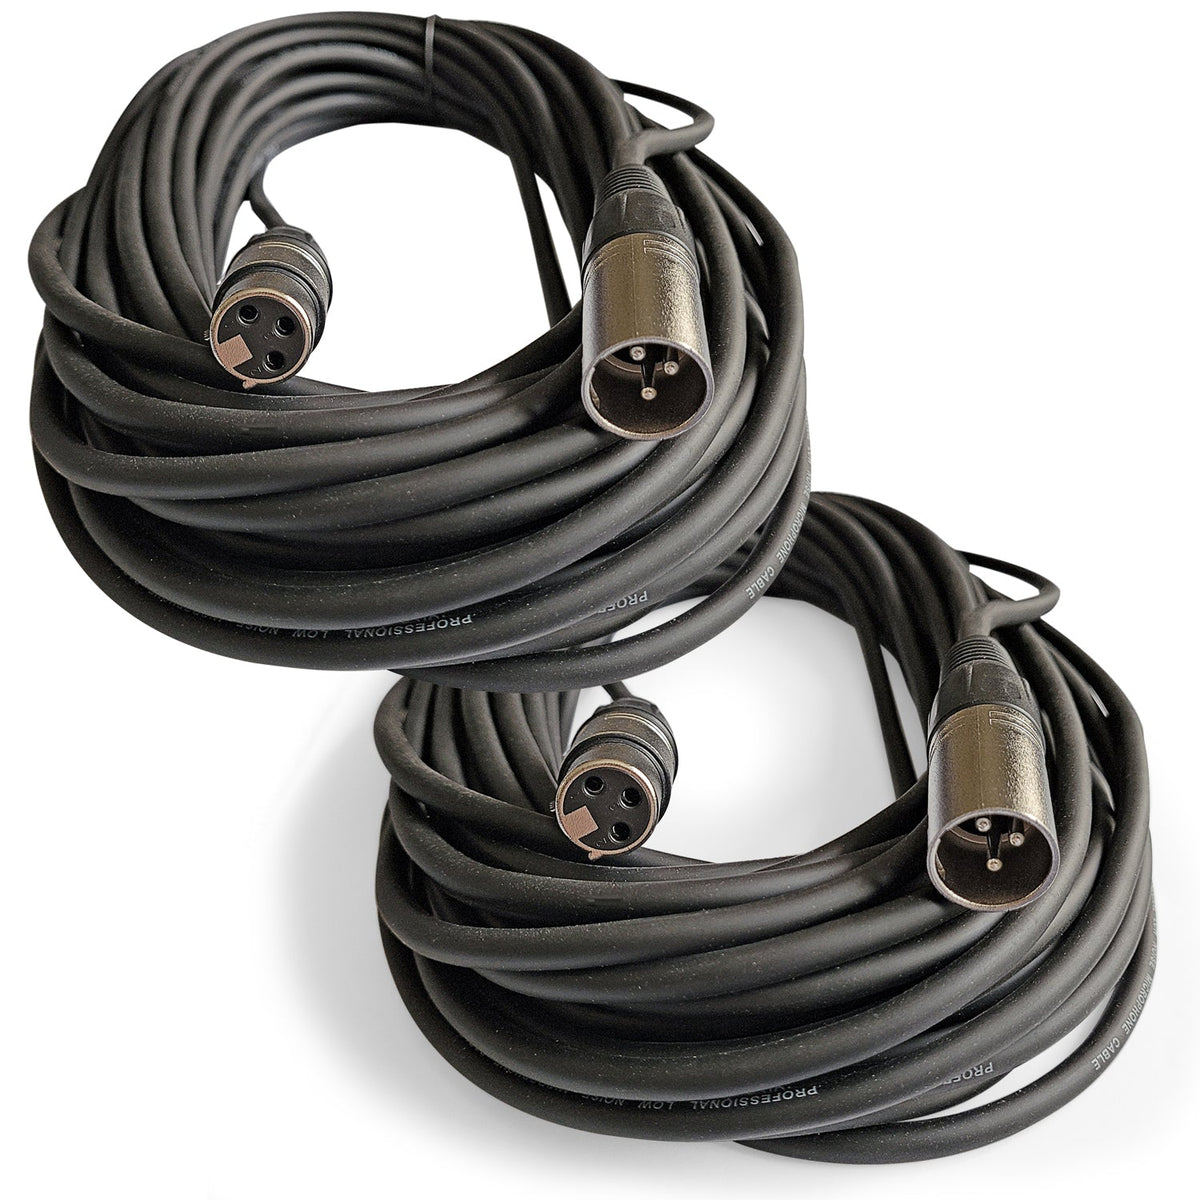 AxcessAbles 20ft XLR Male to Female Microphone Cable | U.S. Based Small Business | Shielded Microphone Cord | DJ Mic Cable | XLR to XLR Balanced Cable | AxcessAbles 20ft XLR Mic Cable (2-Pack)